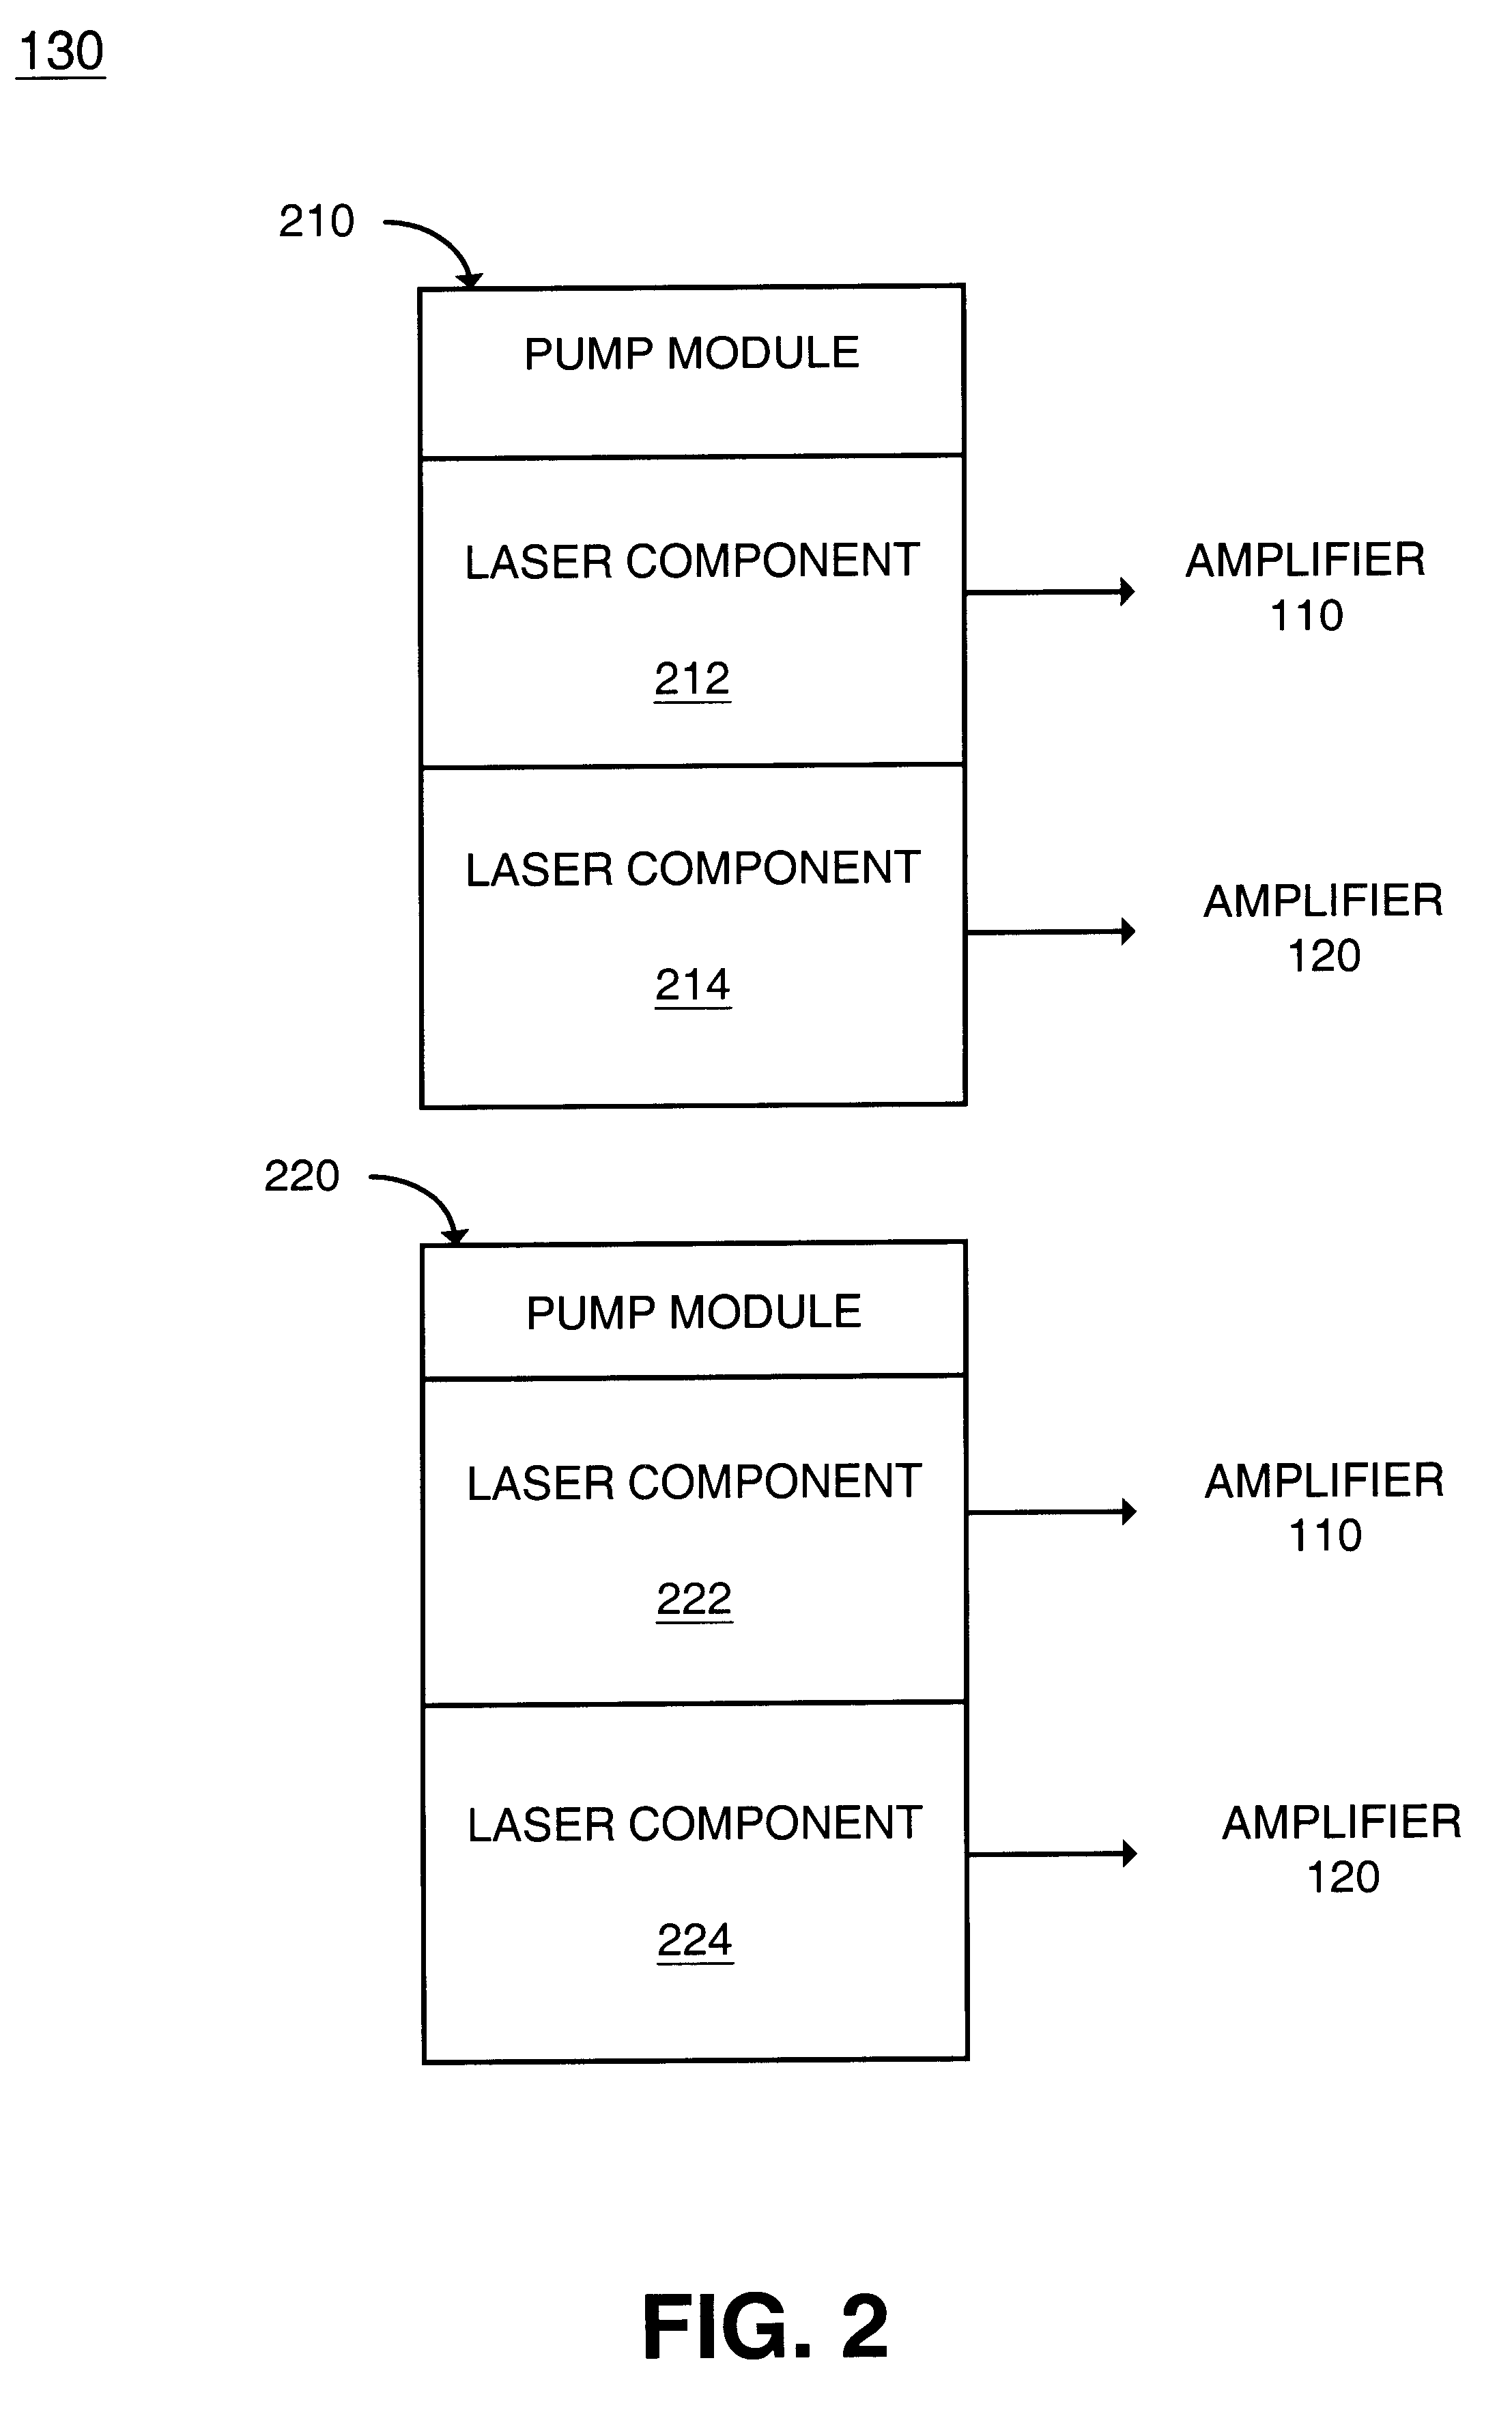 Systems and methods for detecting fault conditions and detecting and preventing potentially dangerous conditions in an optical system